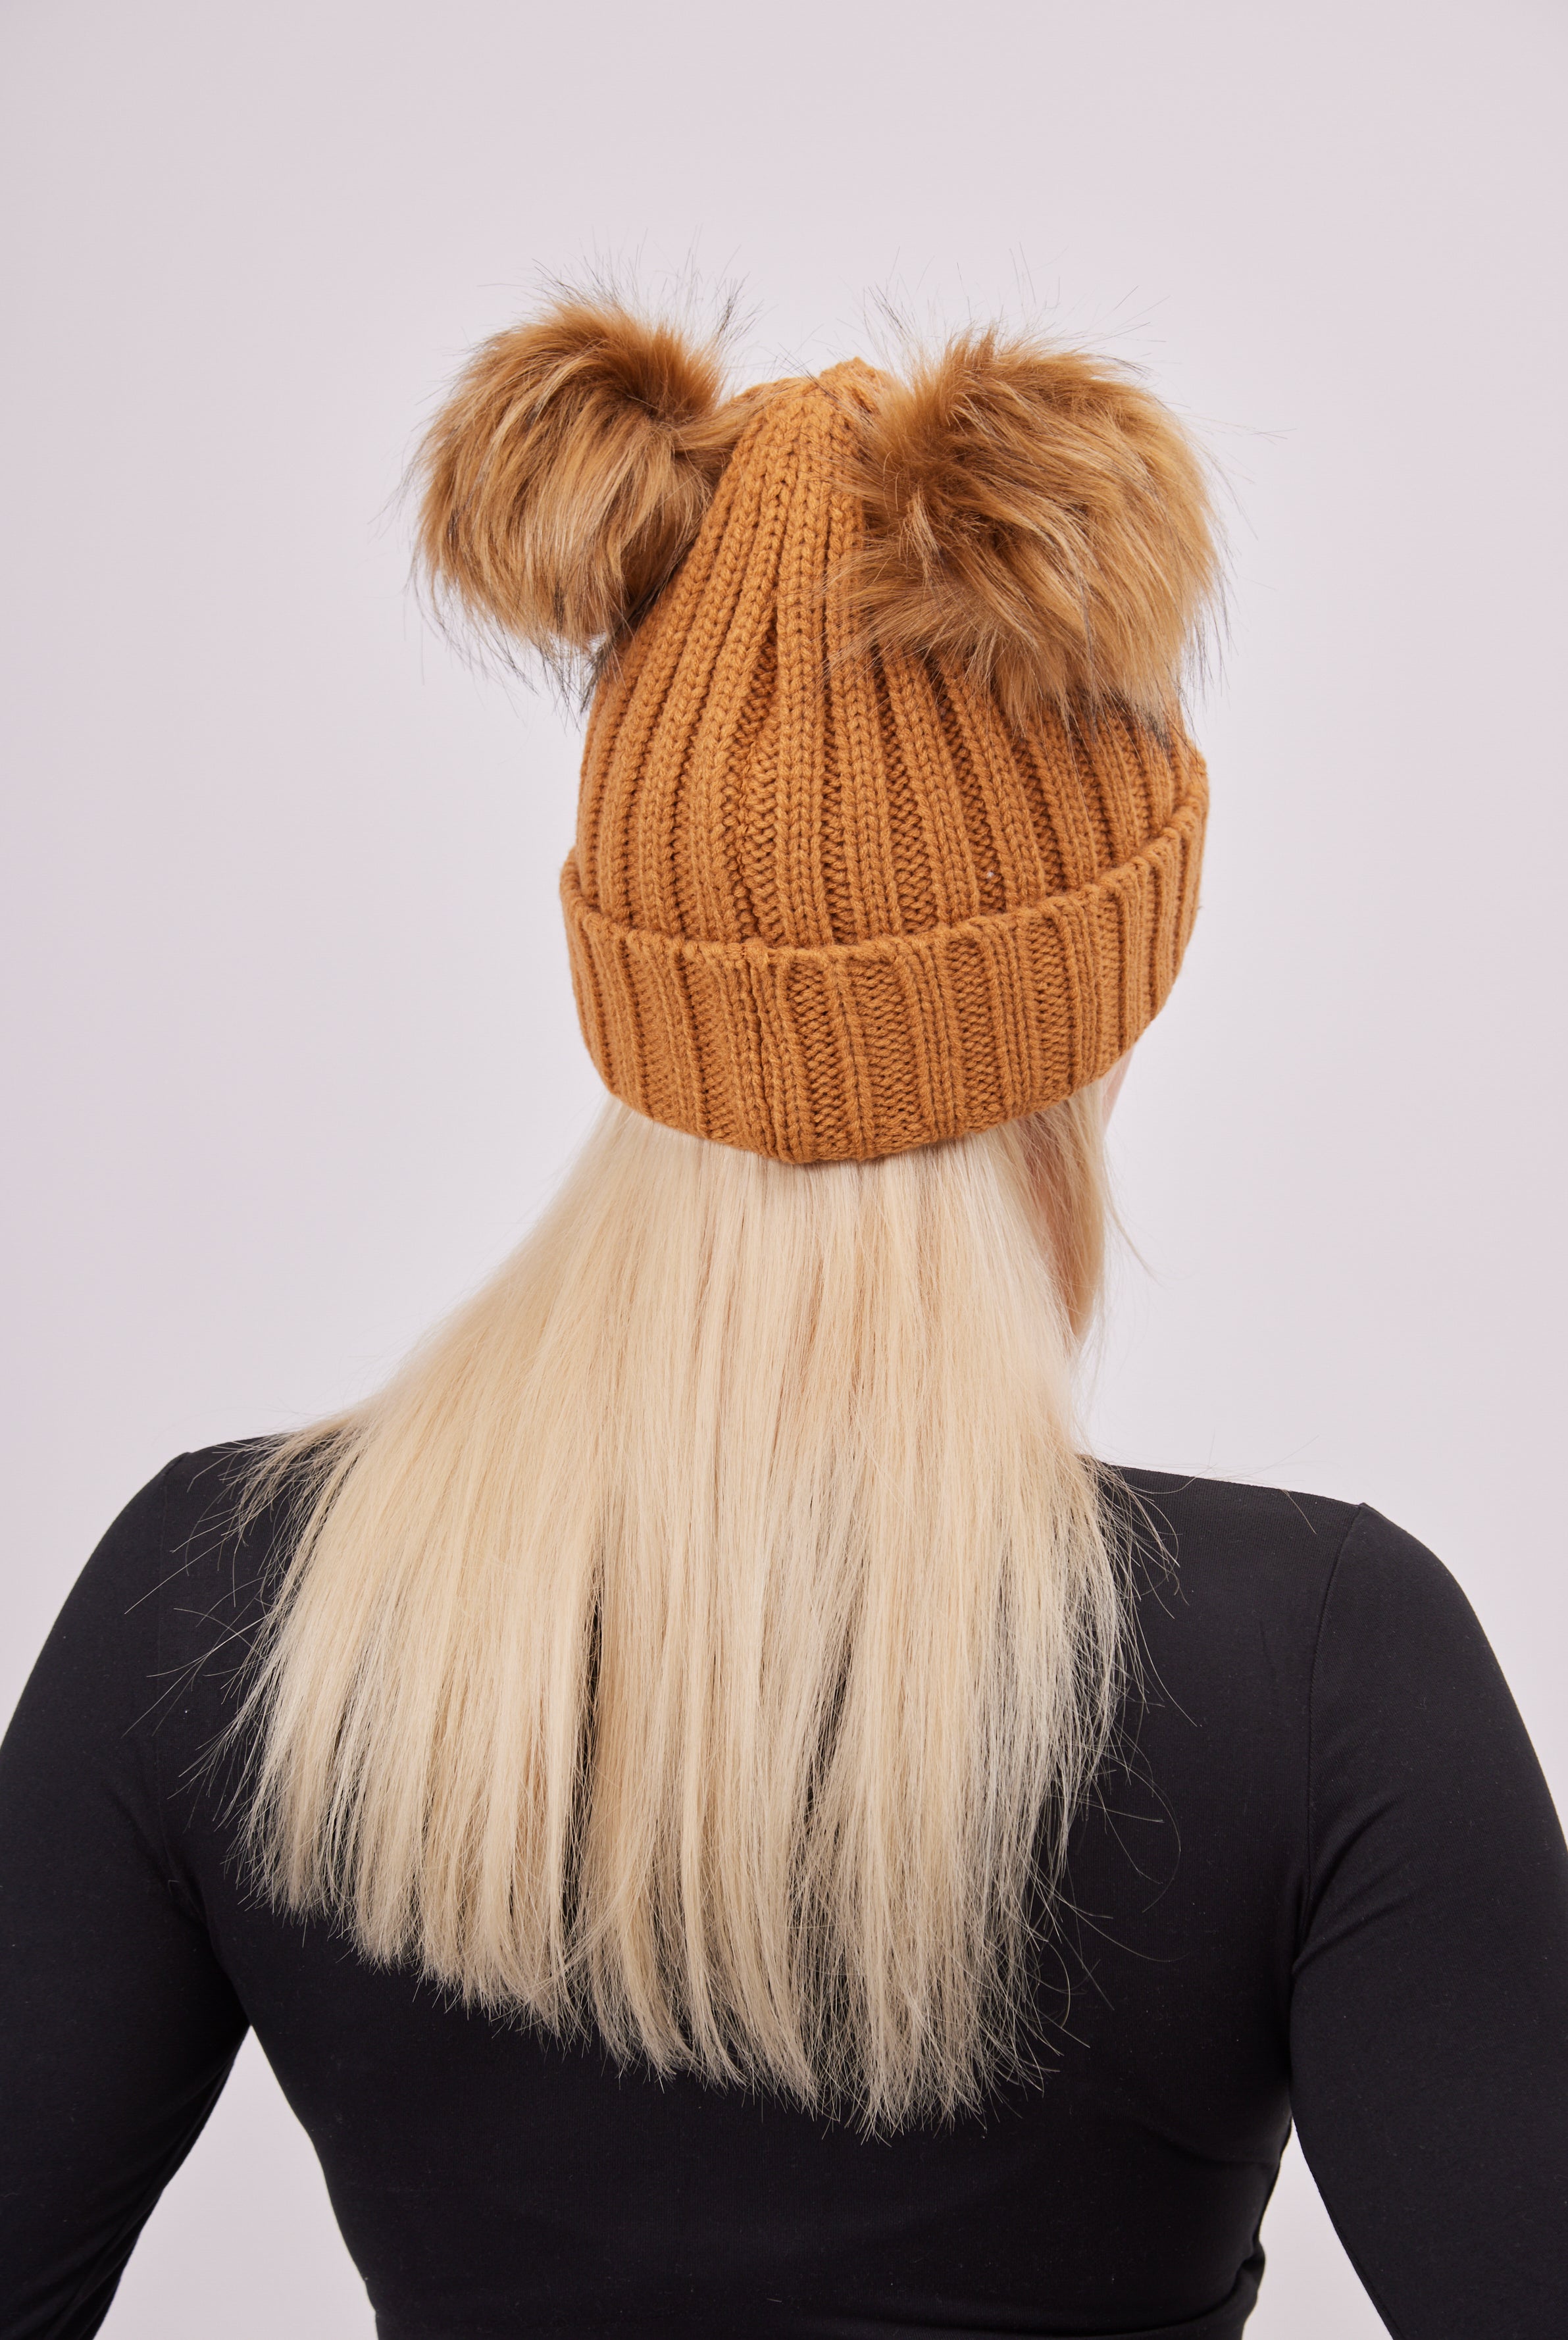 My Accessories London Knitted Double Fur Pom Beanie in Brown | Knitted | Winter Accessories | Women | Women's | Accessories | Accessory | Fluffy | Vegan | Ski | Warm